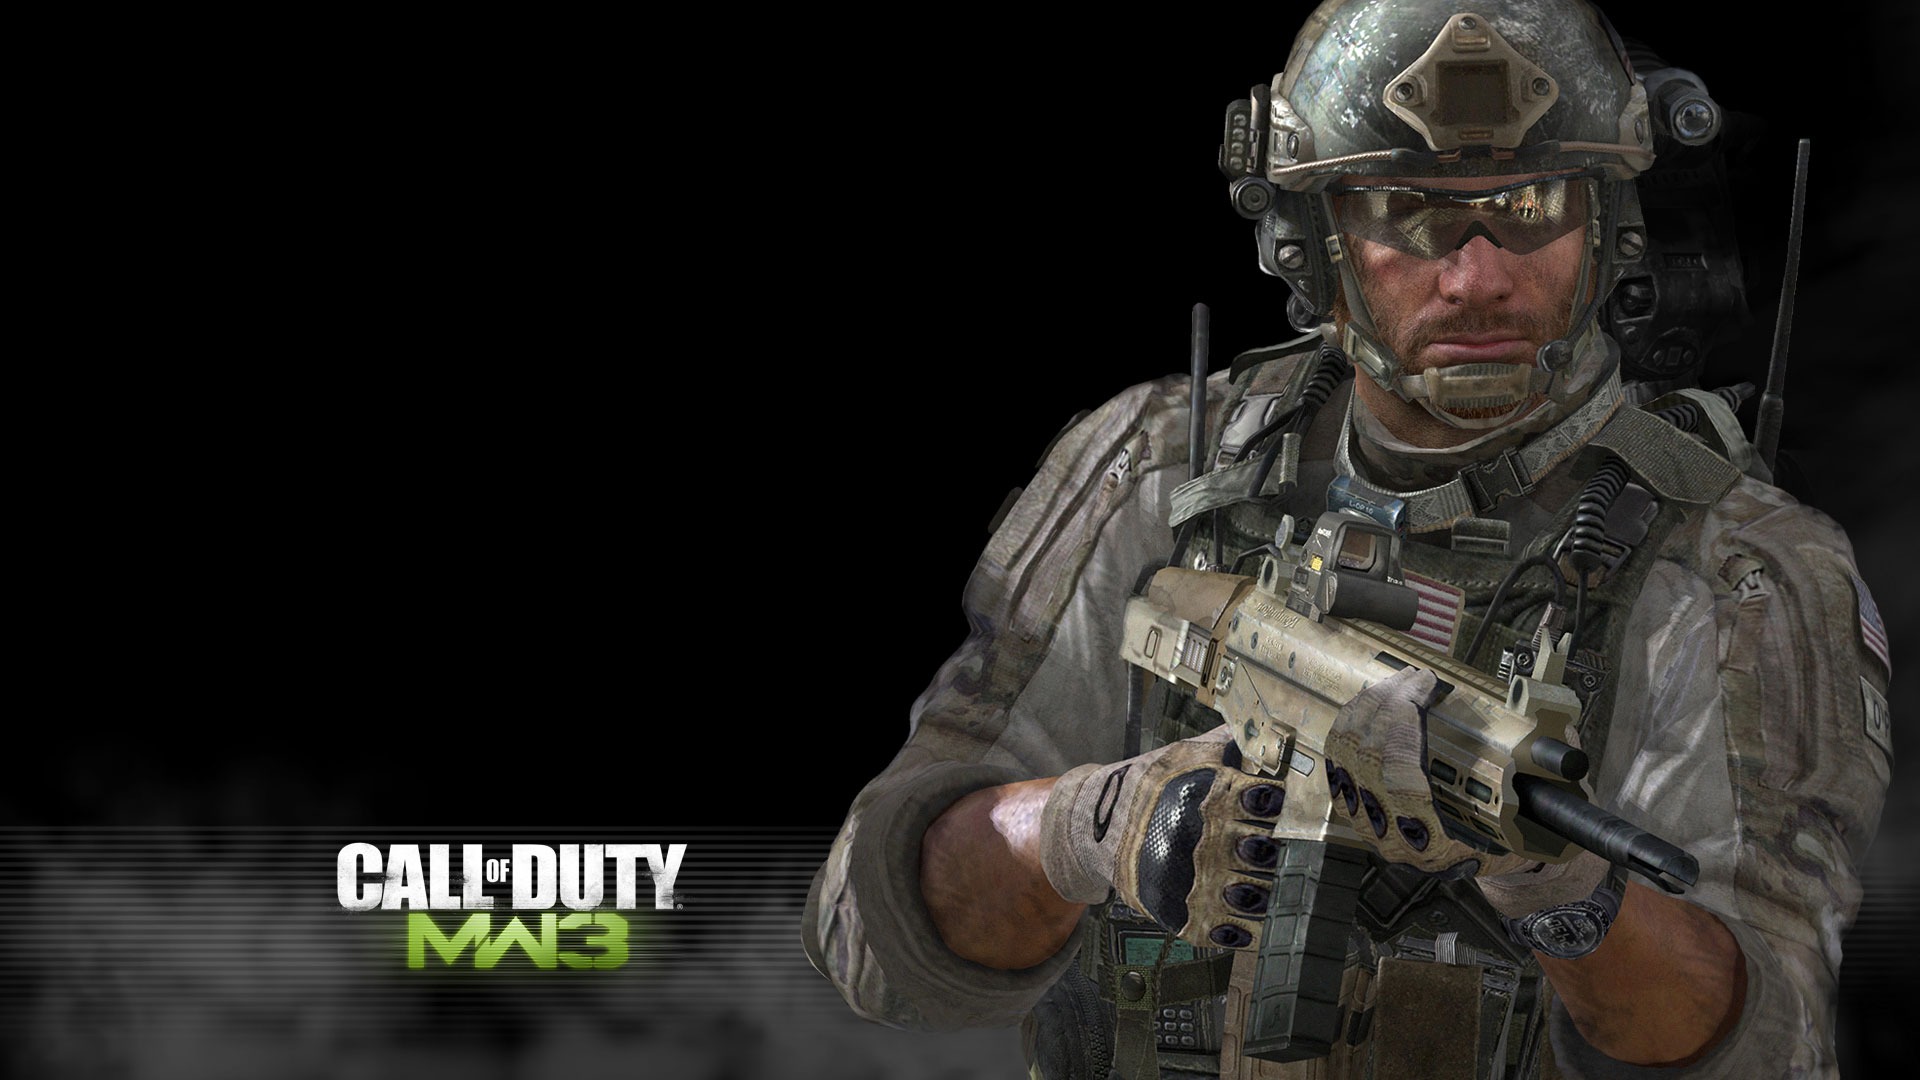 Call of Duty: MW3 wallpapers HD #11 - 1920x1080